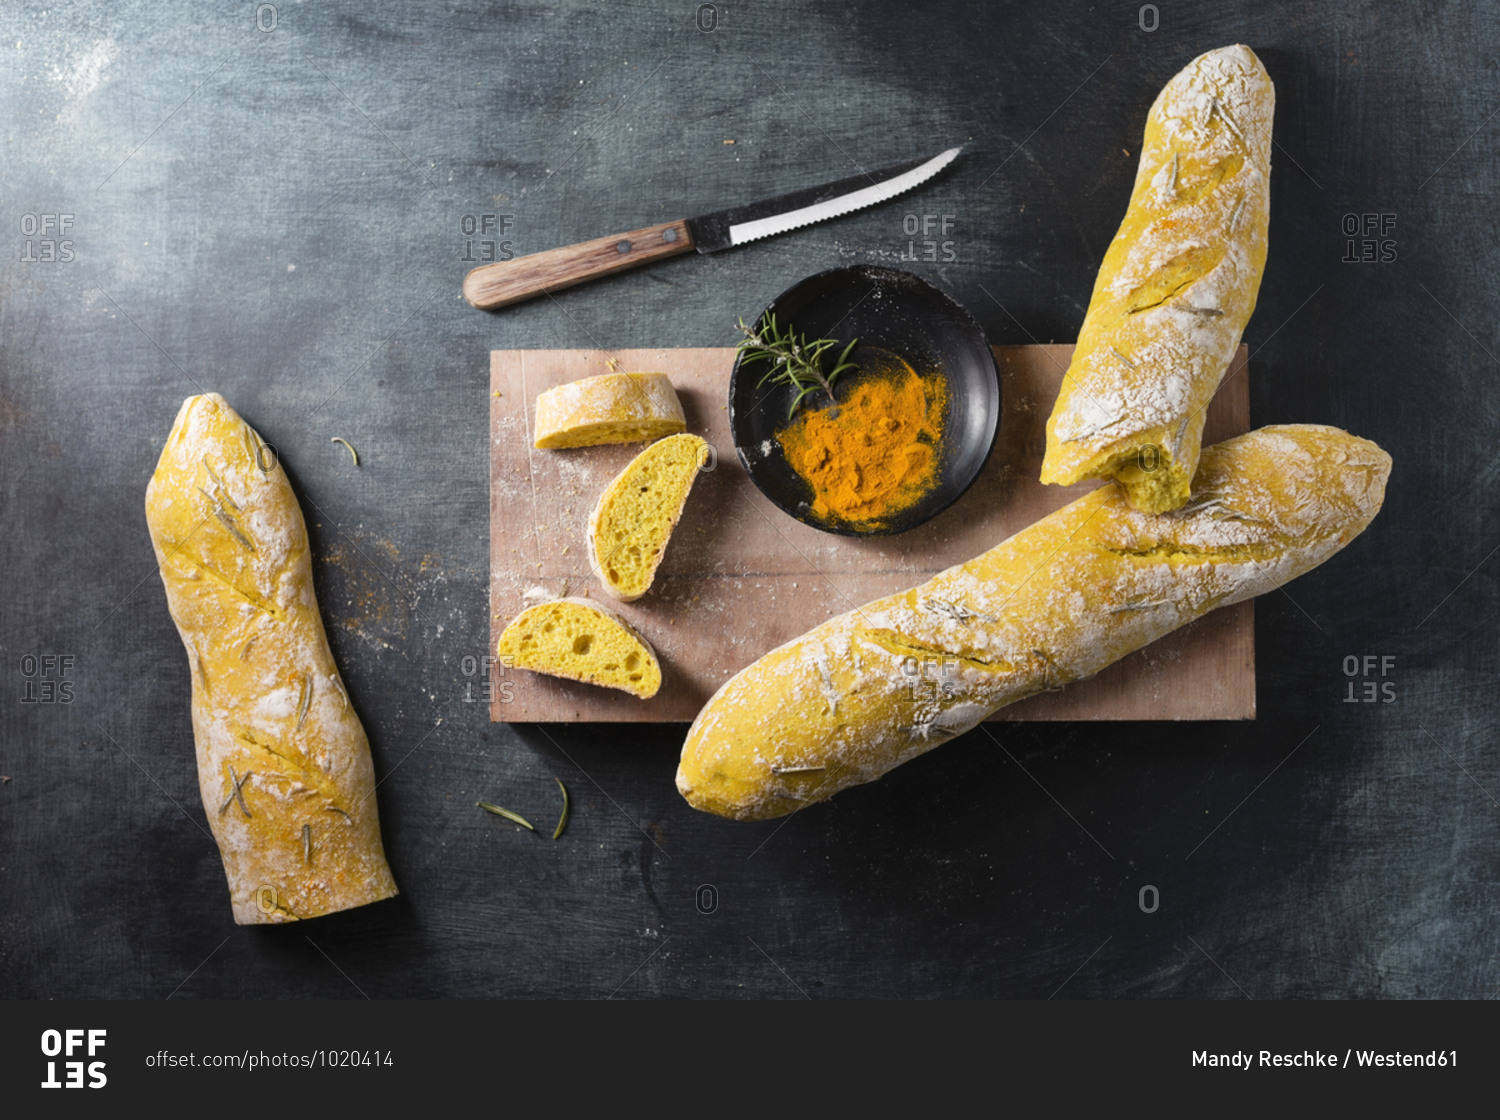 Cutting board- kitchen knife- fresh baguettes and bowl with turmeric and rosemary